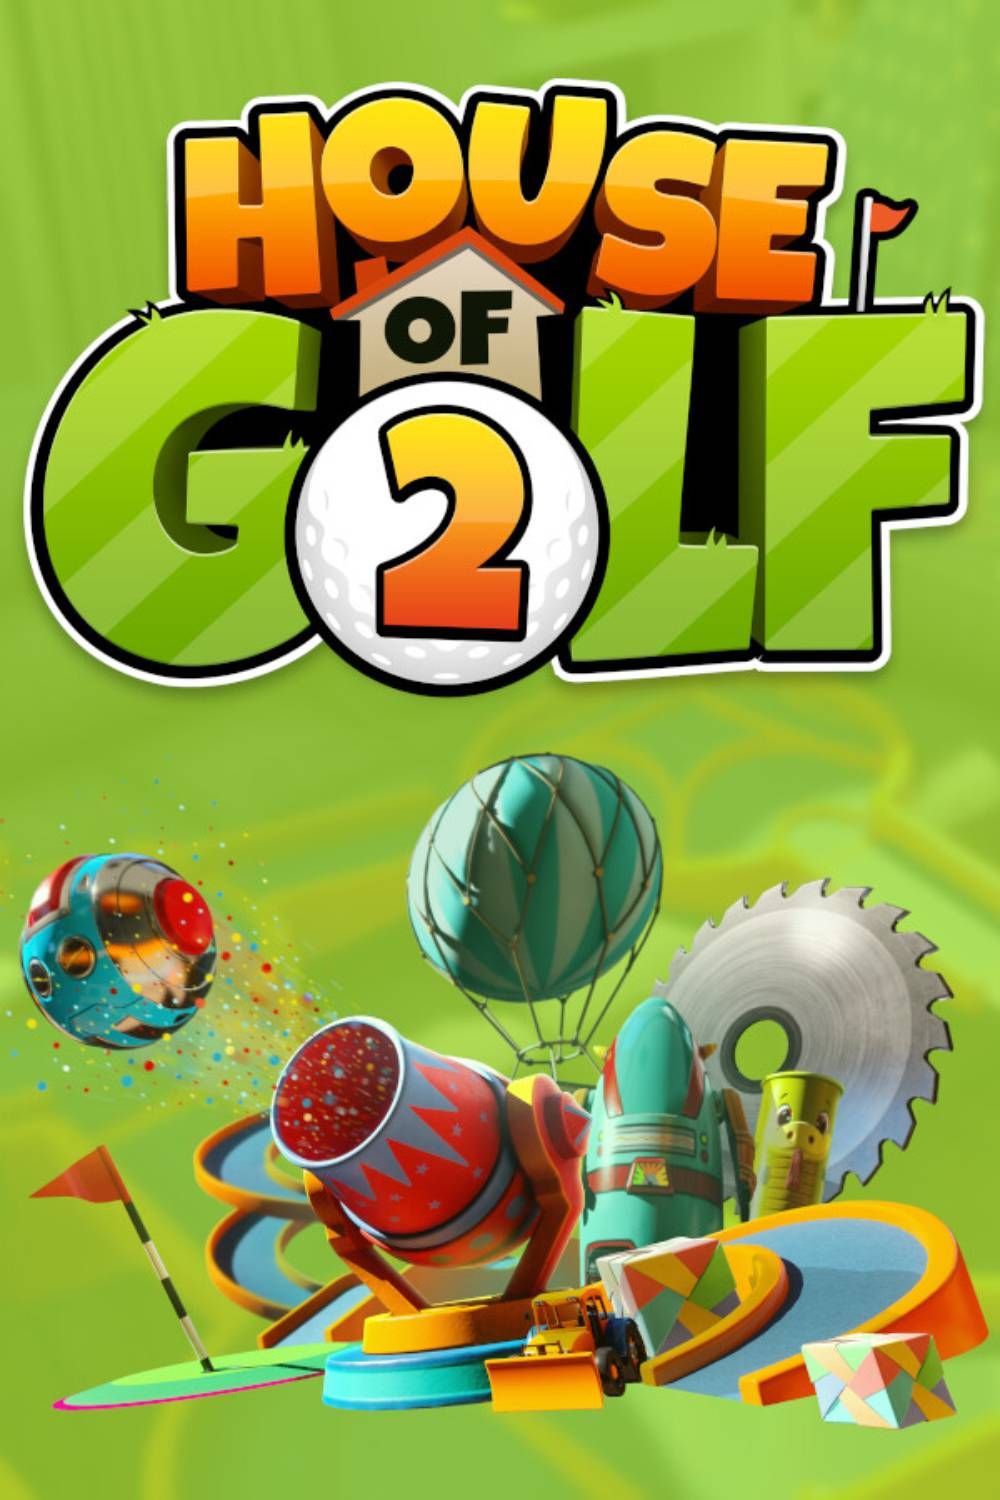 House of Golf 2 Tag Page Cover Art